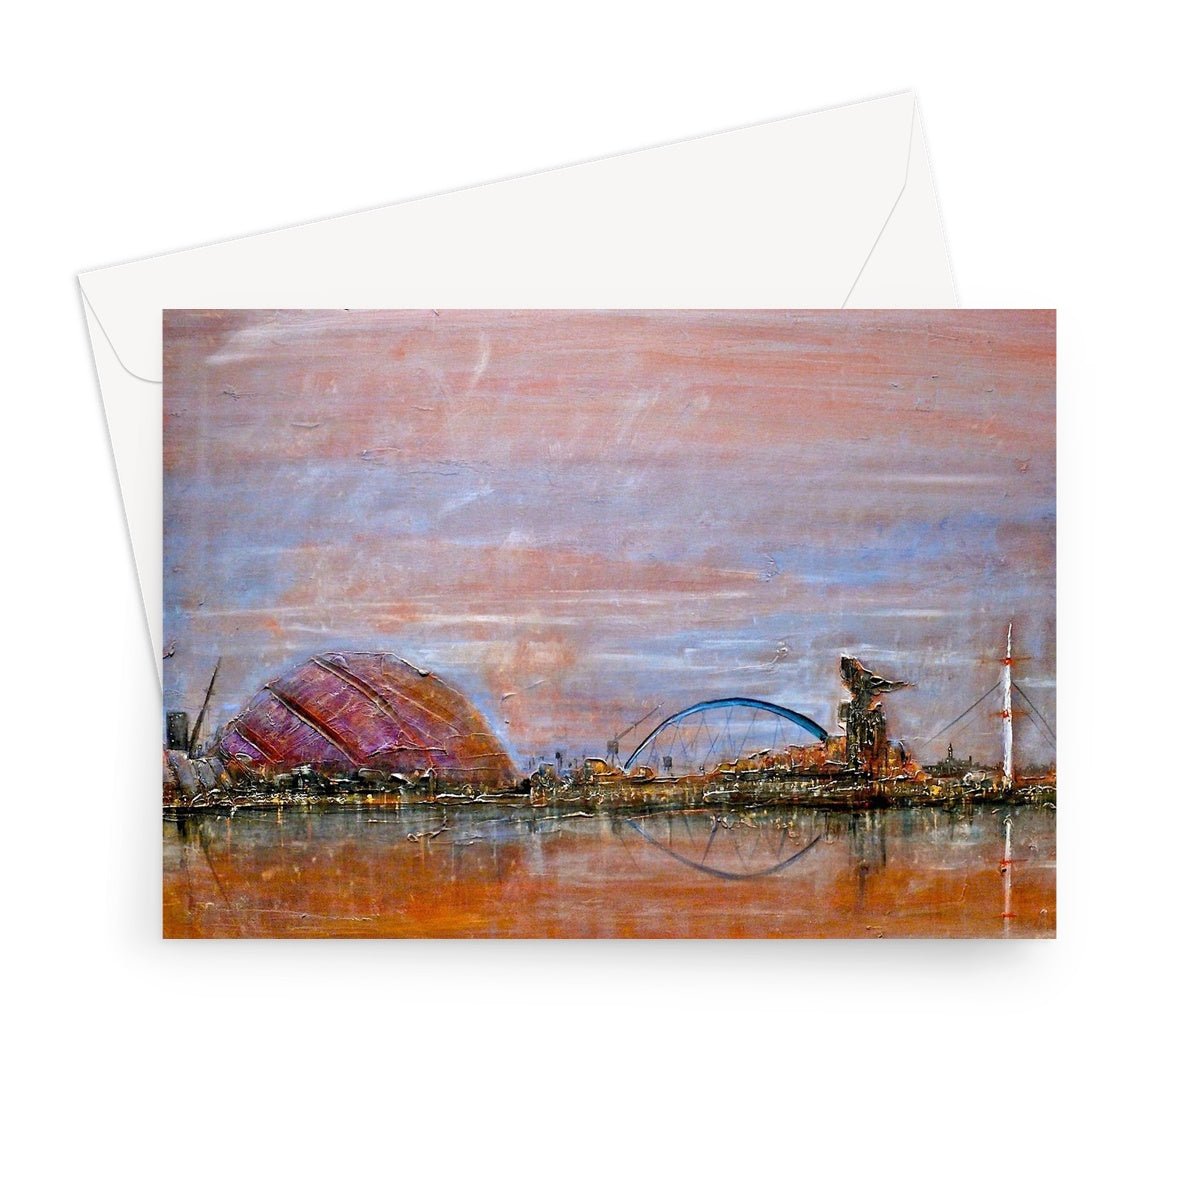 Glasgow Harbour Art Gifts Greeting Card-Greetings Cards-Edinburgh & Glasgow Art Gallery-7"x5"-1 Card-Paintings, Prints, Homeware, Art Gifts From Scotland By Scottish Artist Kevin Hunter